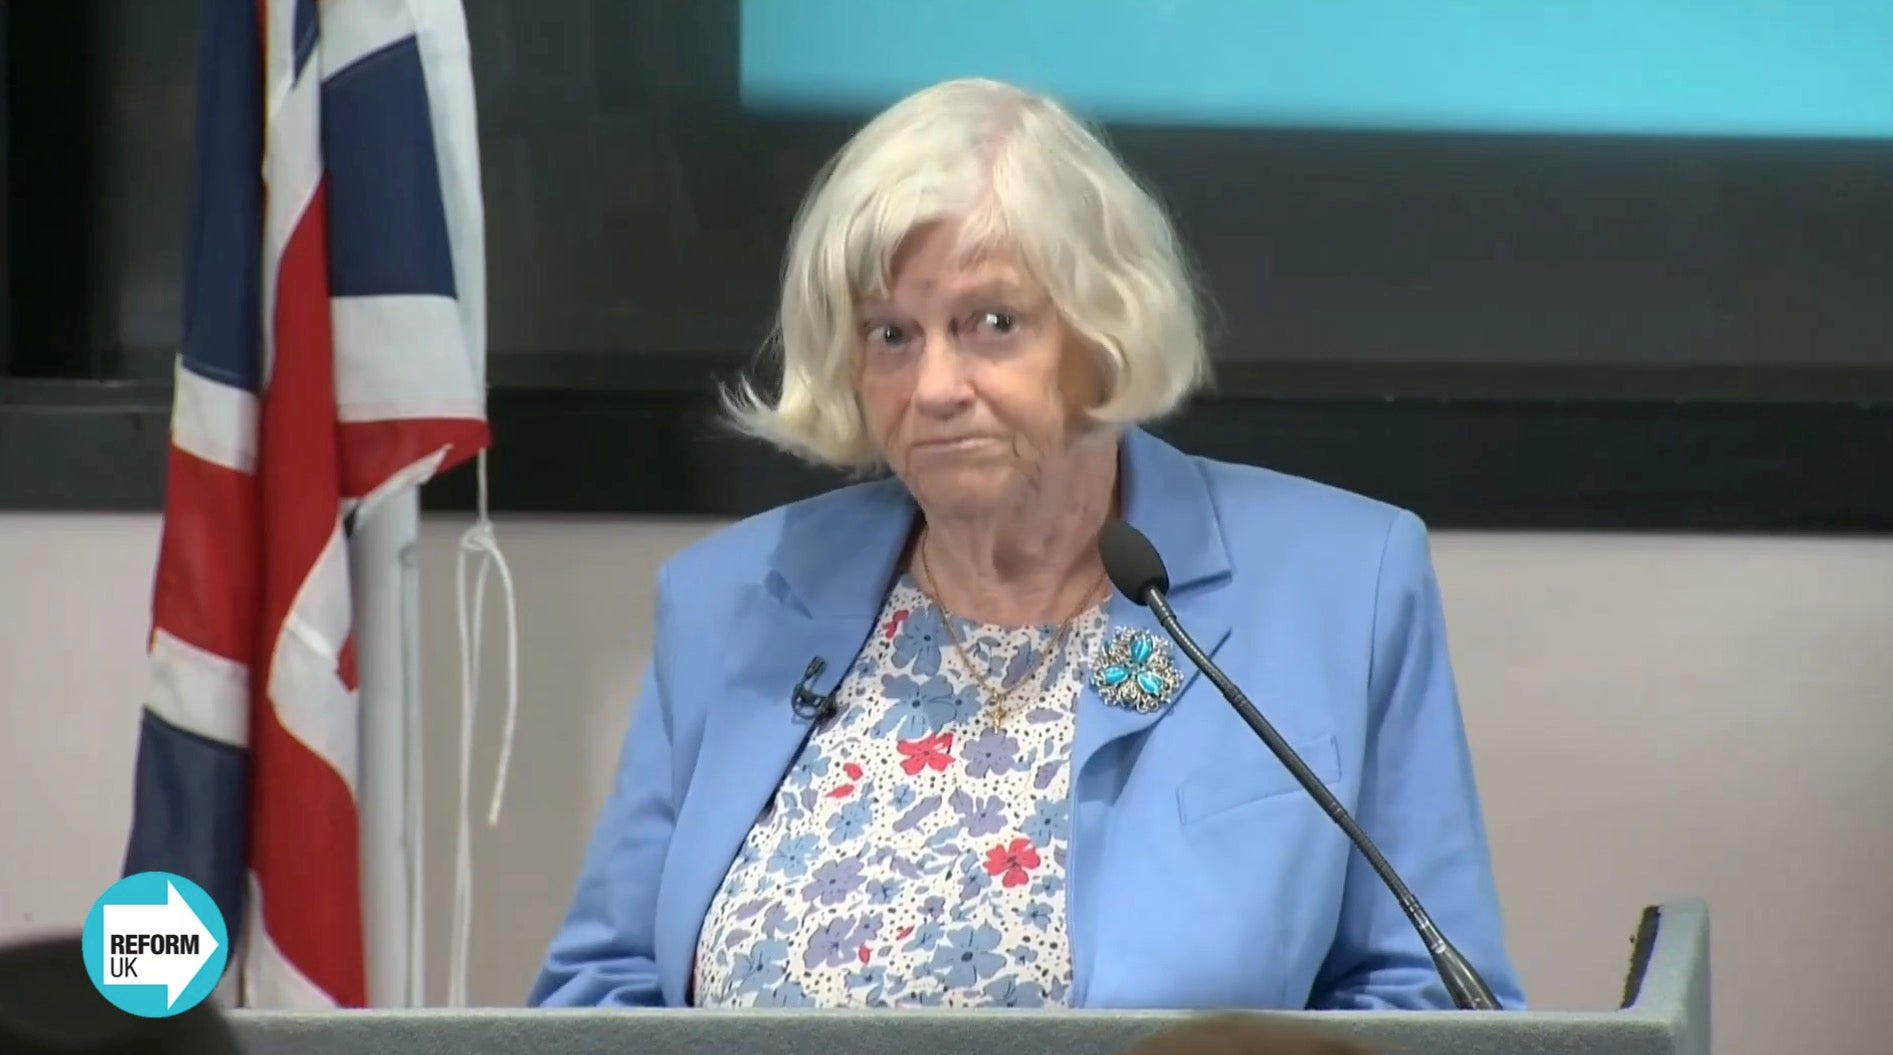 Ann Widdecombe is set to be deployed by Reform in Clacton